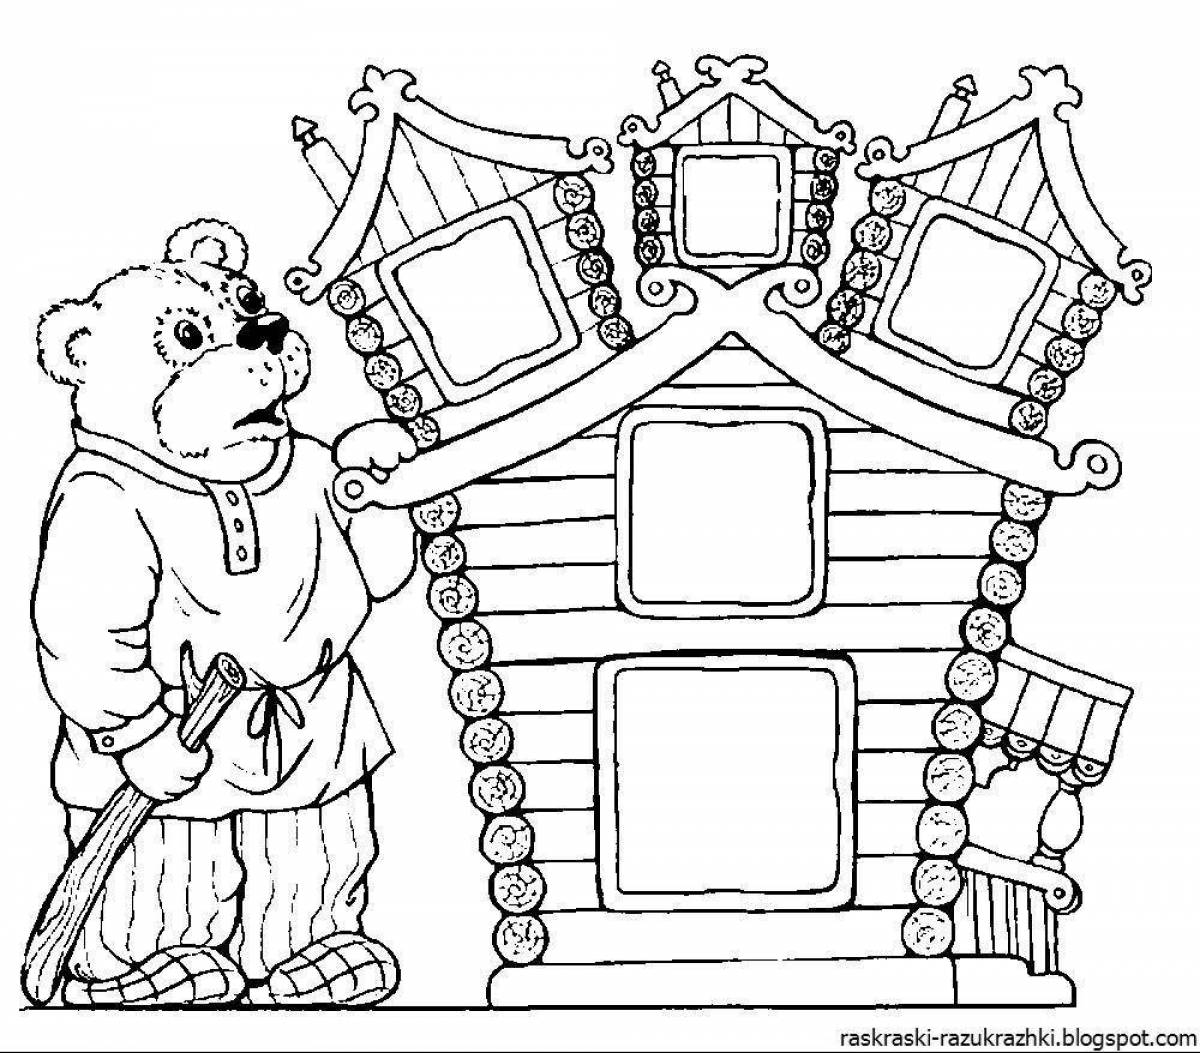 Creative coloring house for children 6-7 years old